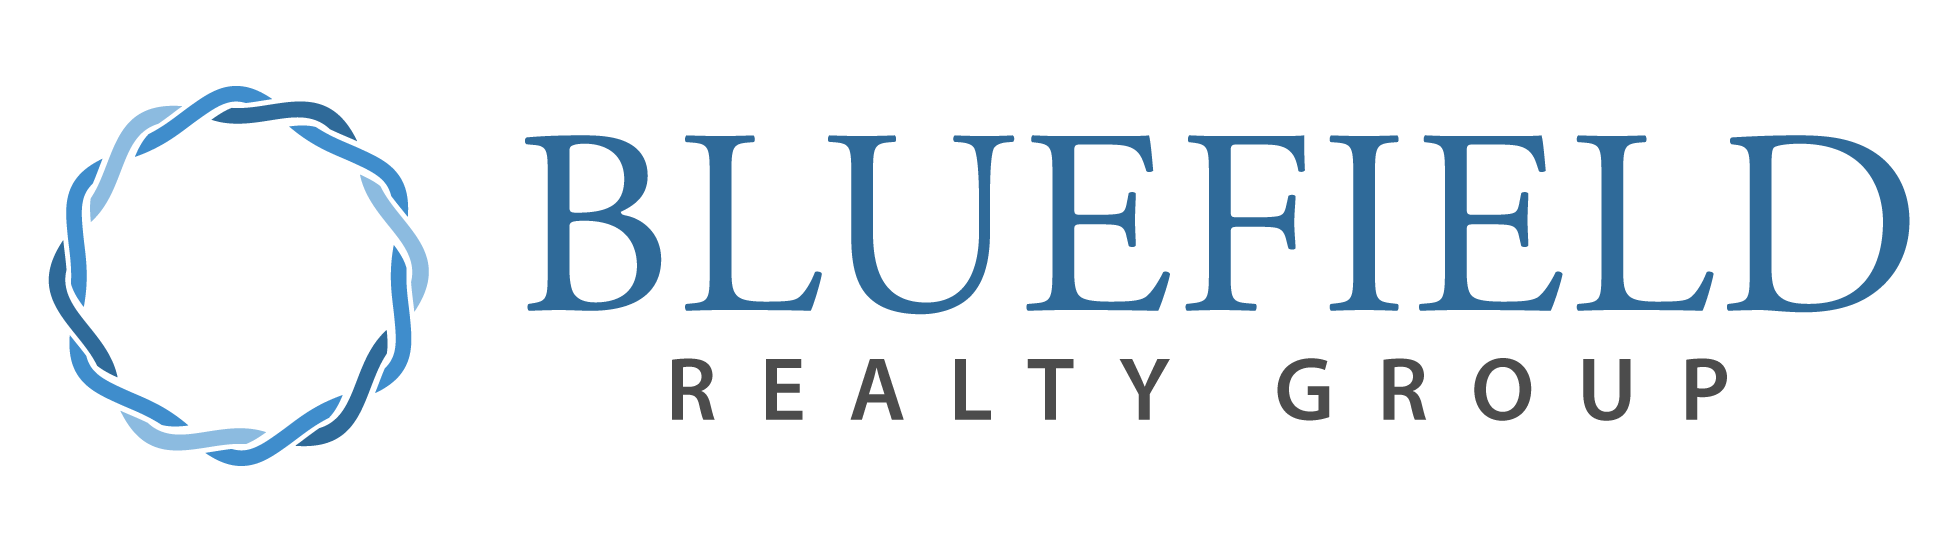 Bluefield Realty Group logo